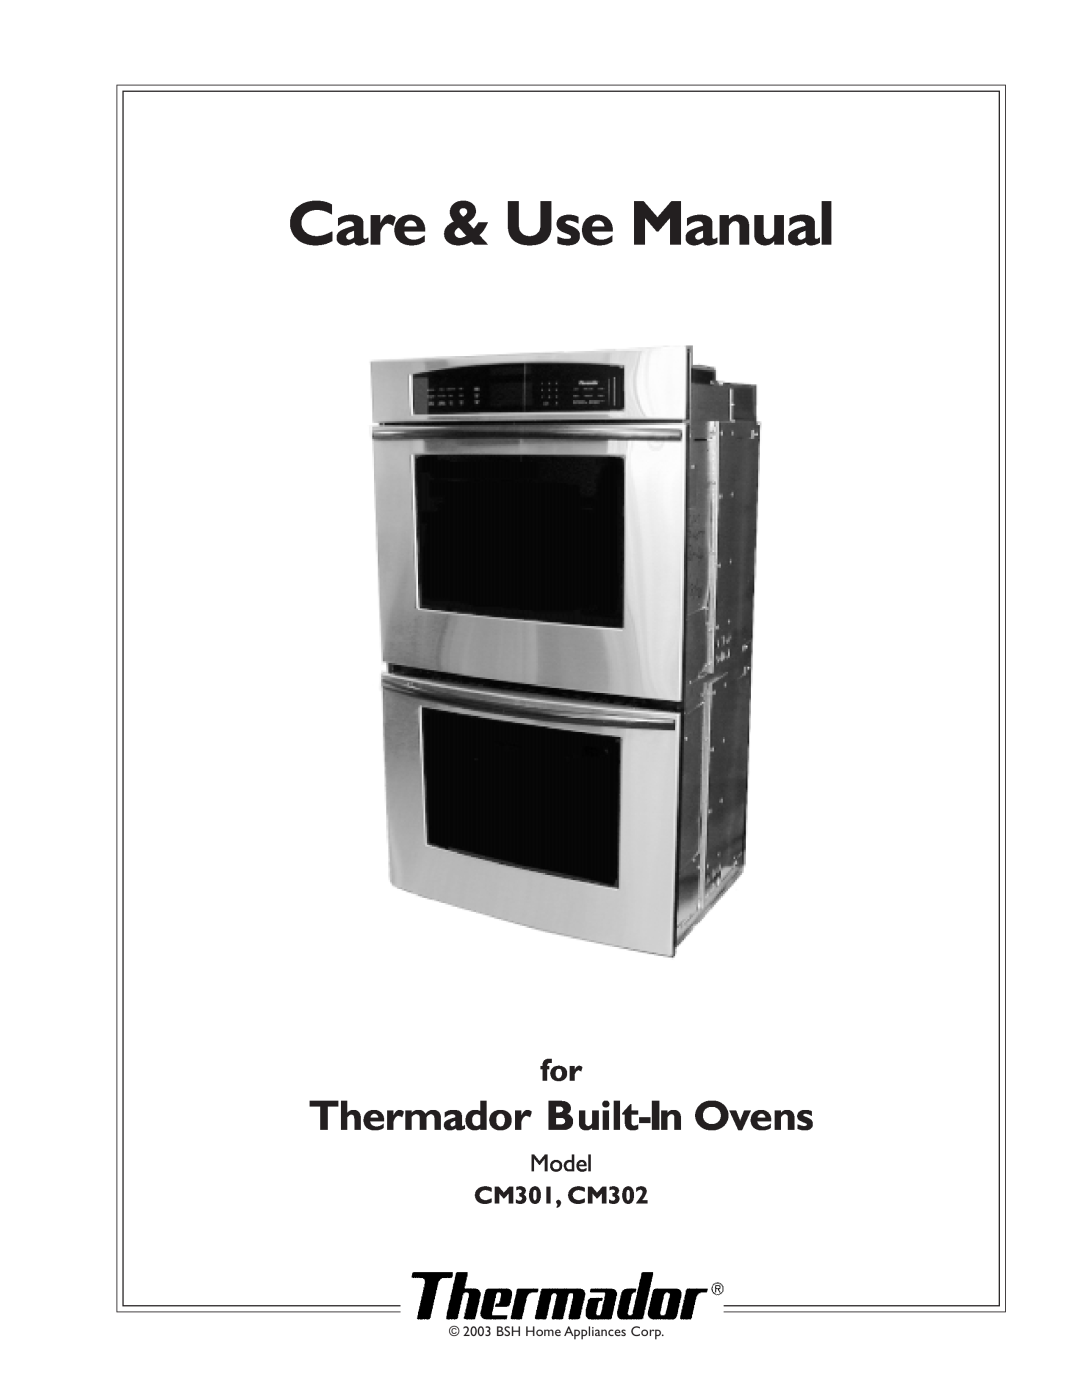 Thermador manual Thermador Built-In Ovens, CM301, CM302, Care & Use Manual, Model, BSH Home Appliances Corp 